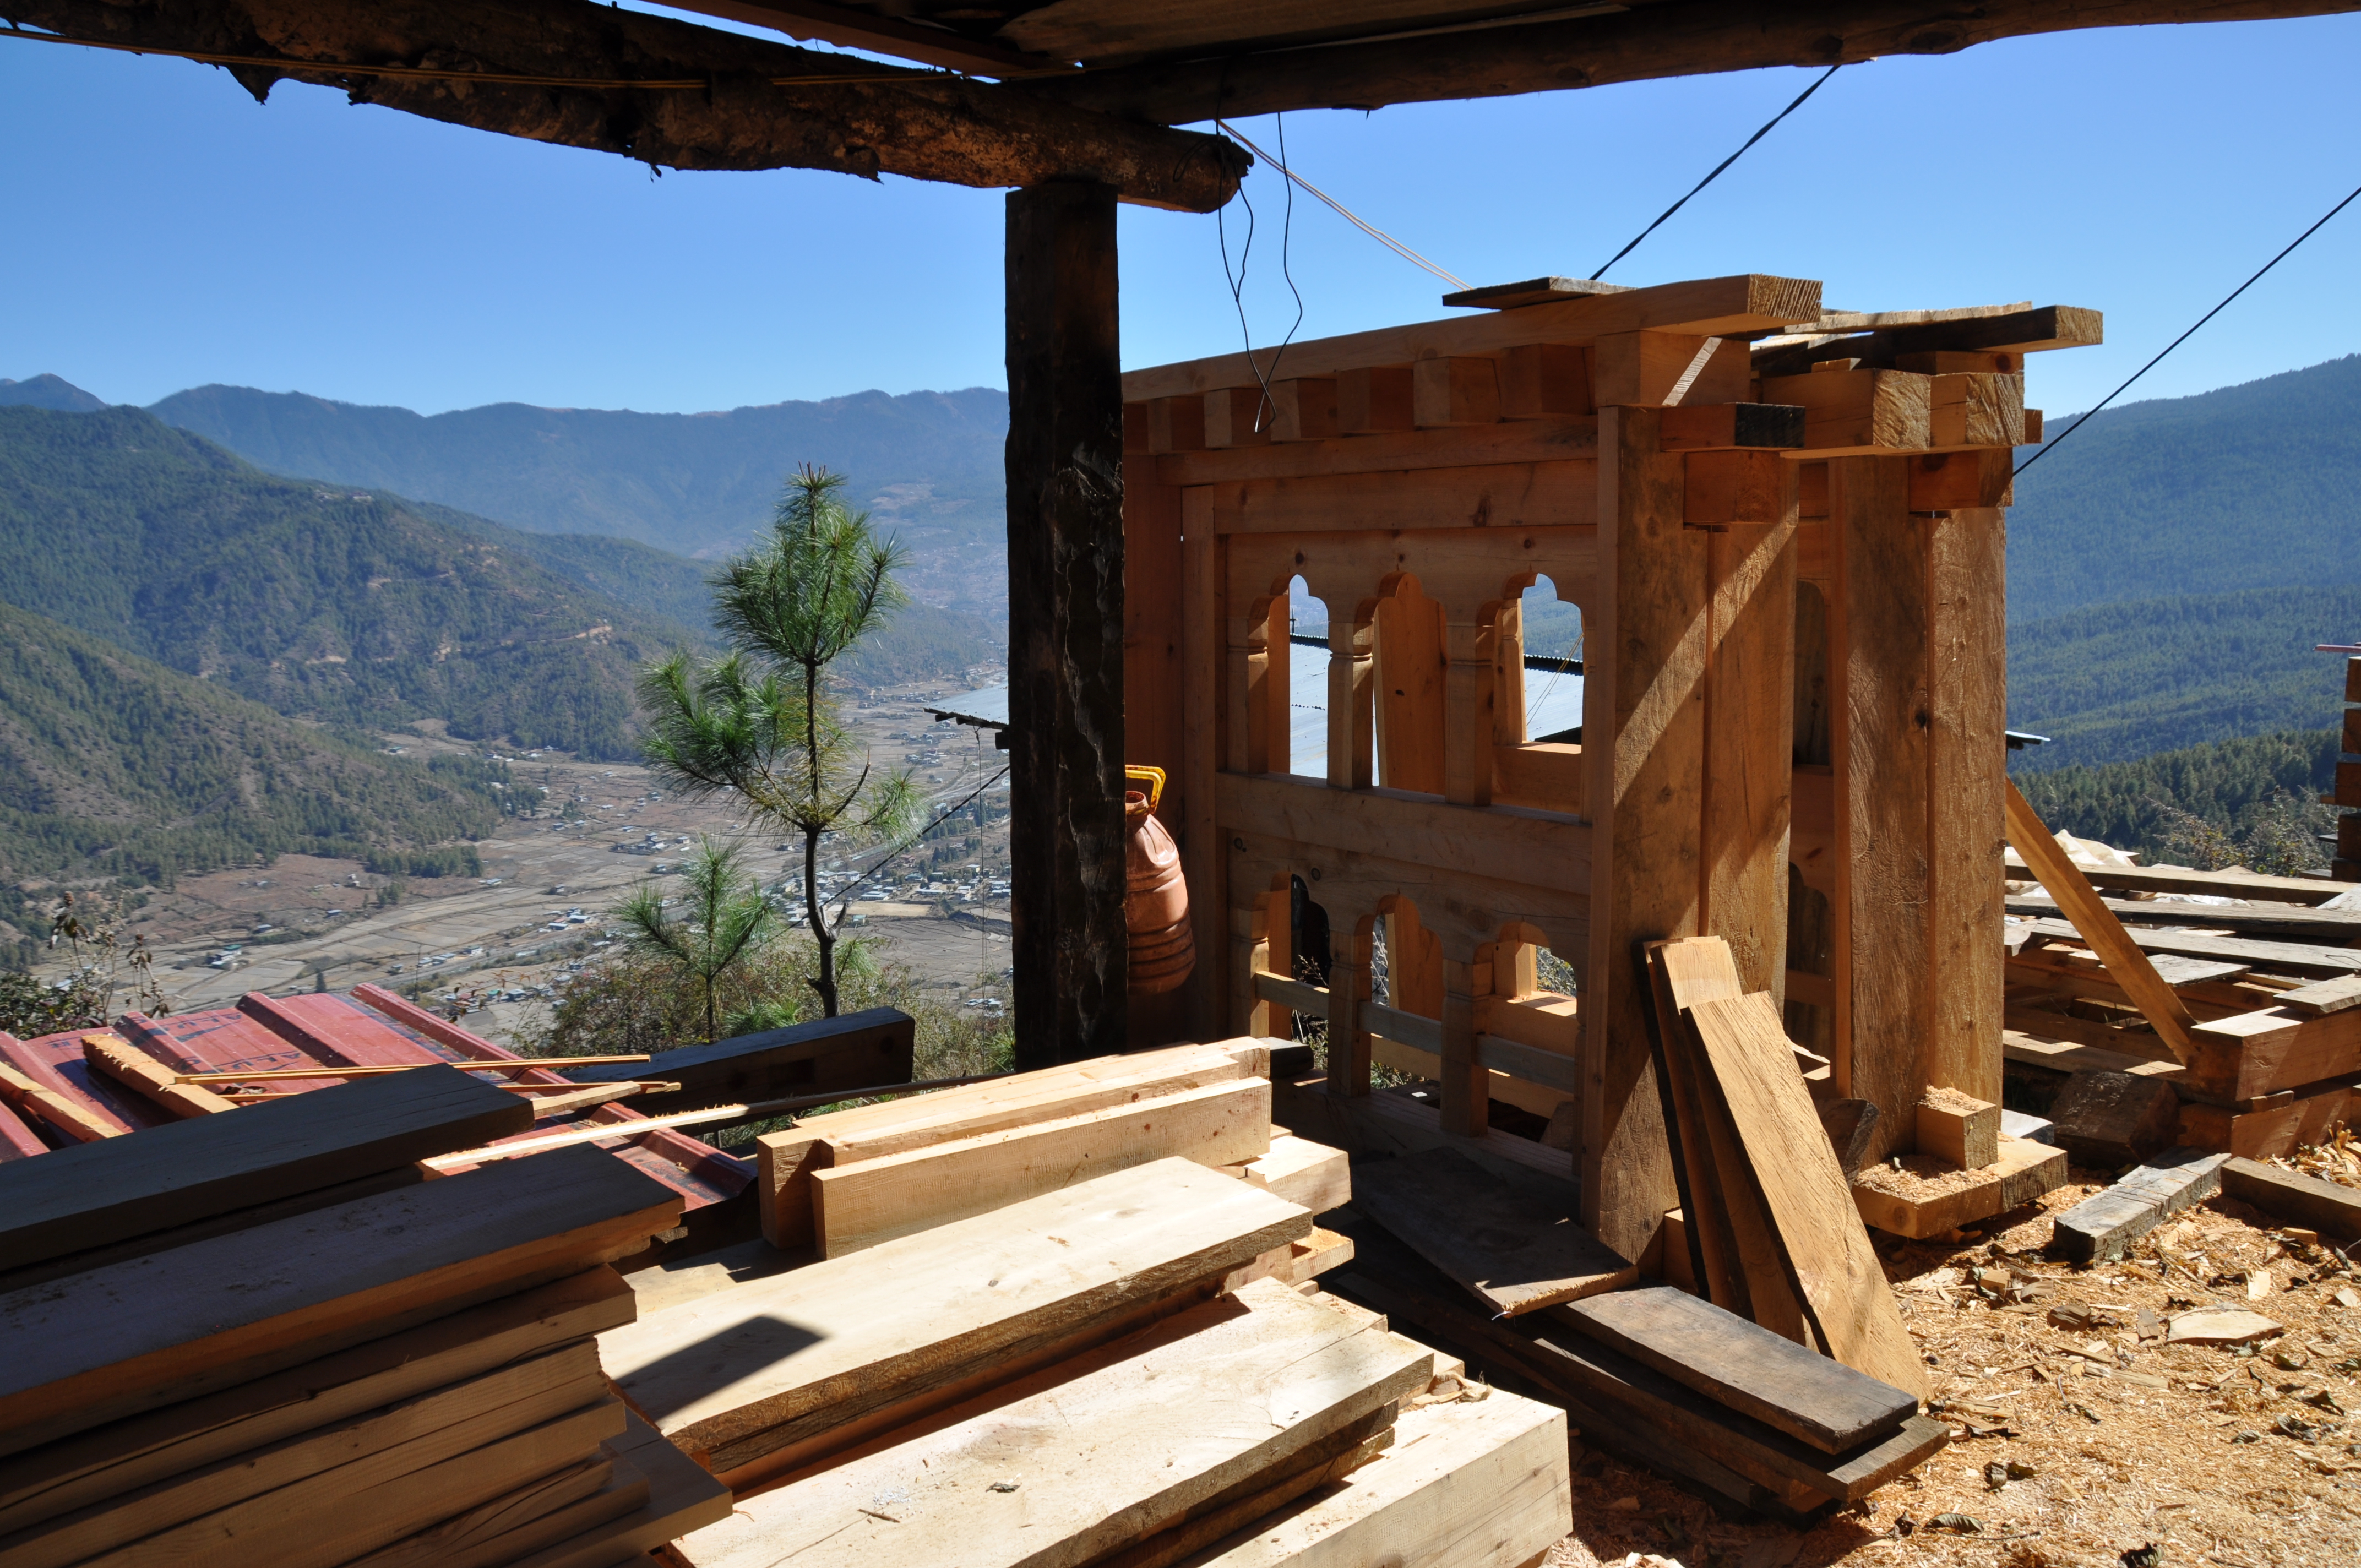 Window components pre-assembled and seasoning, Paro Valley in Bhutan.